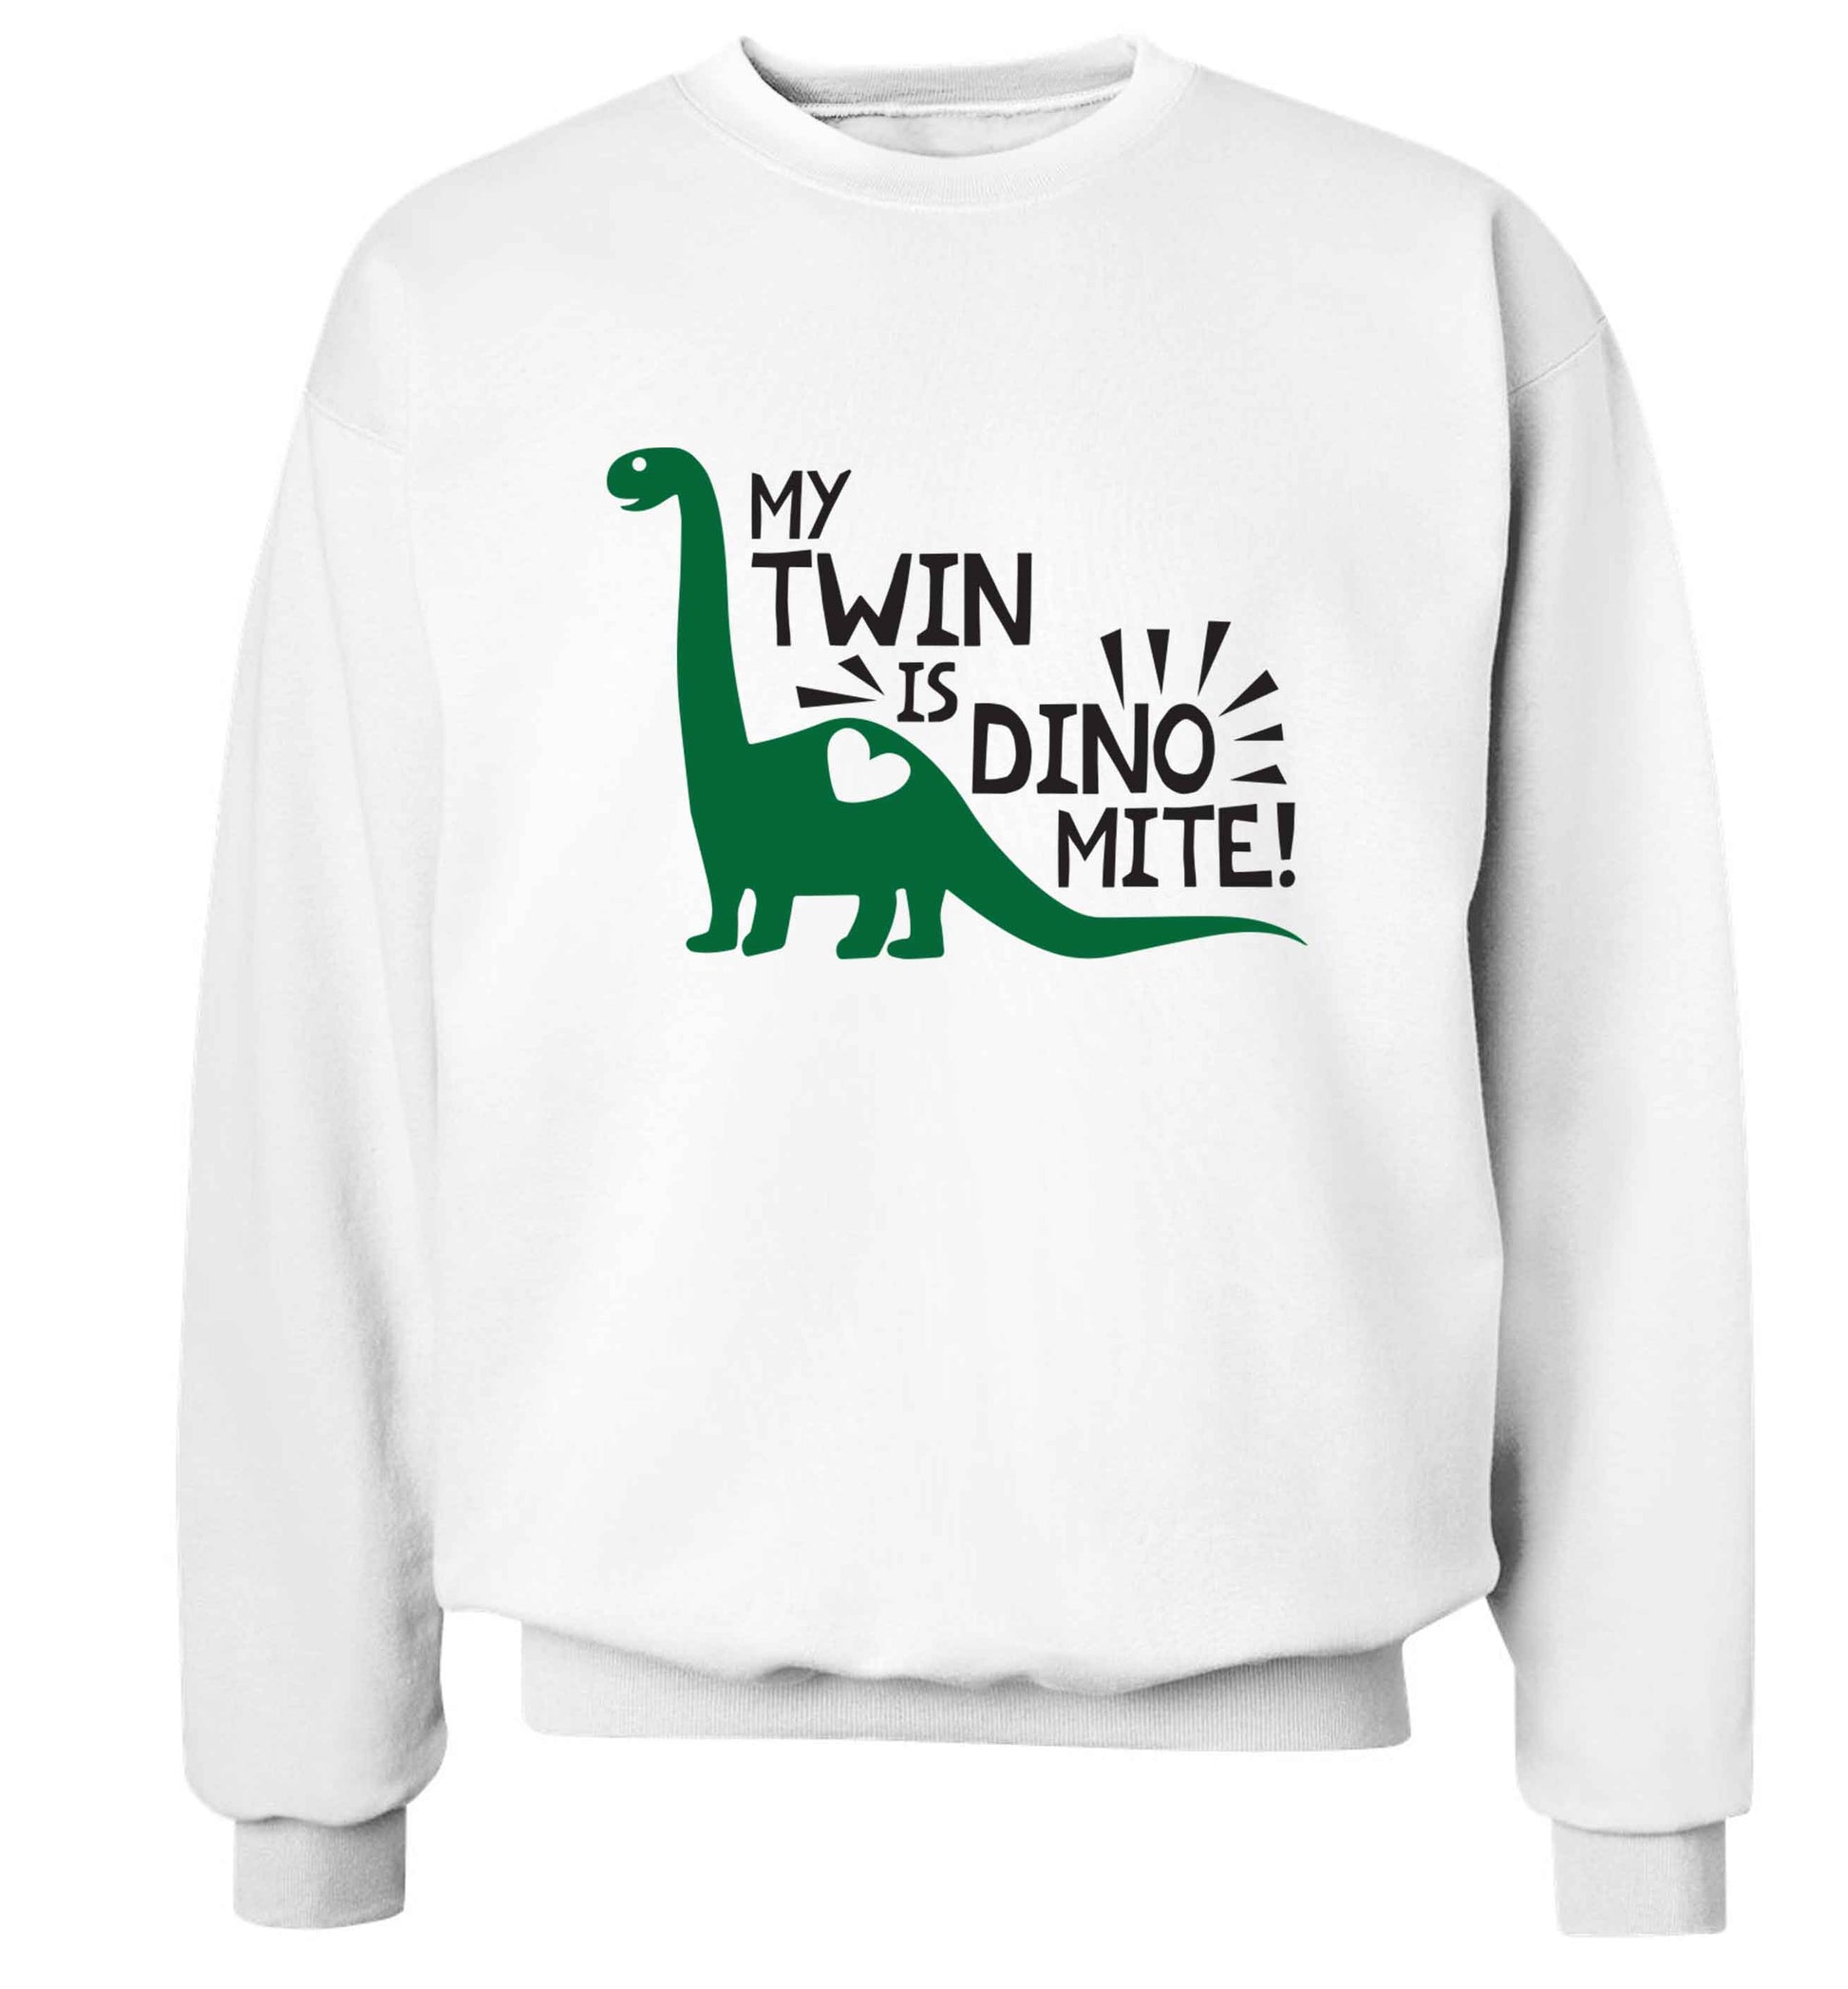 My twin is dinomite! Adult's unisex white Sweater 2XL